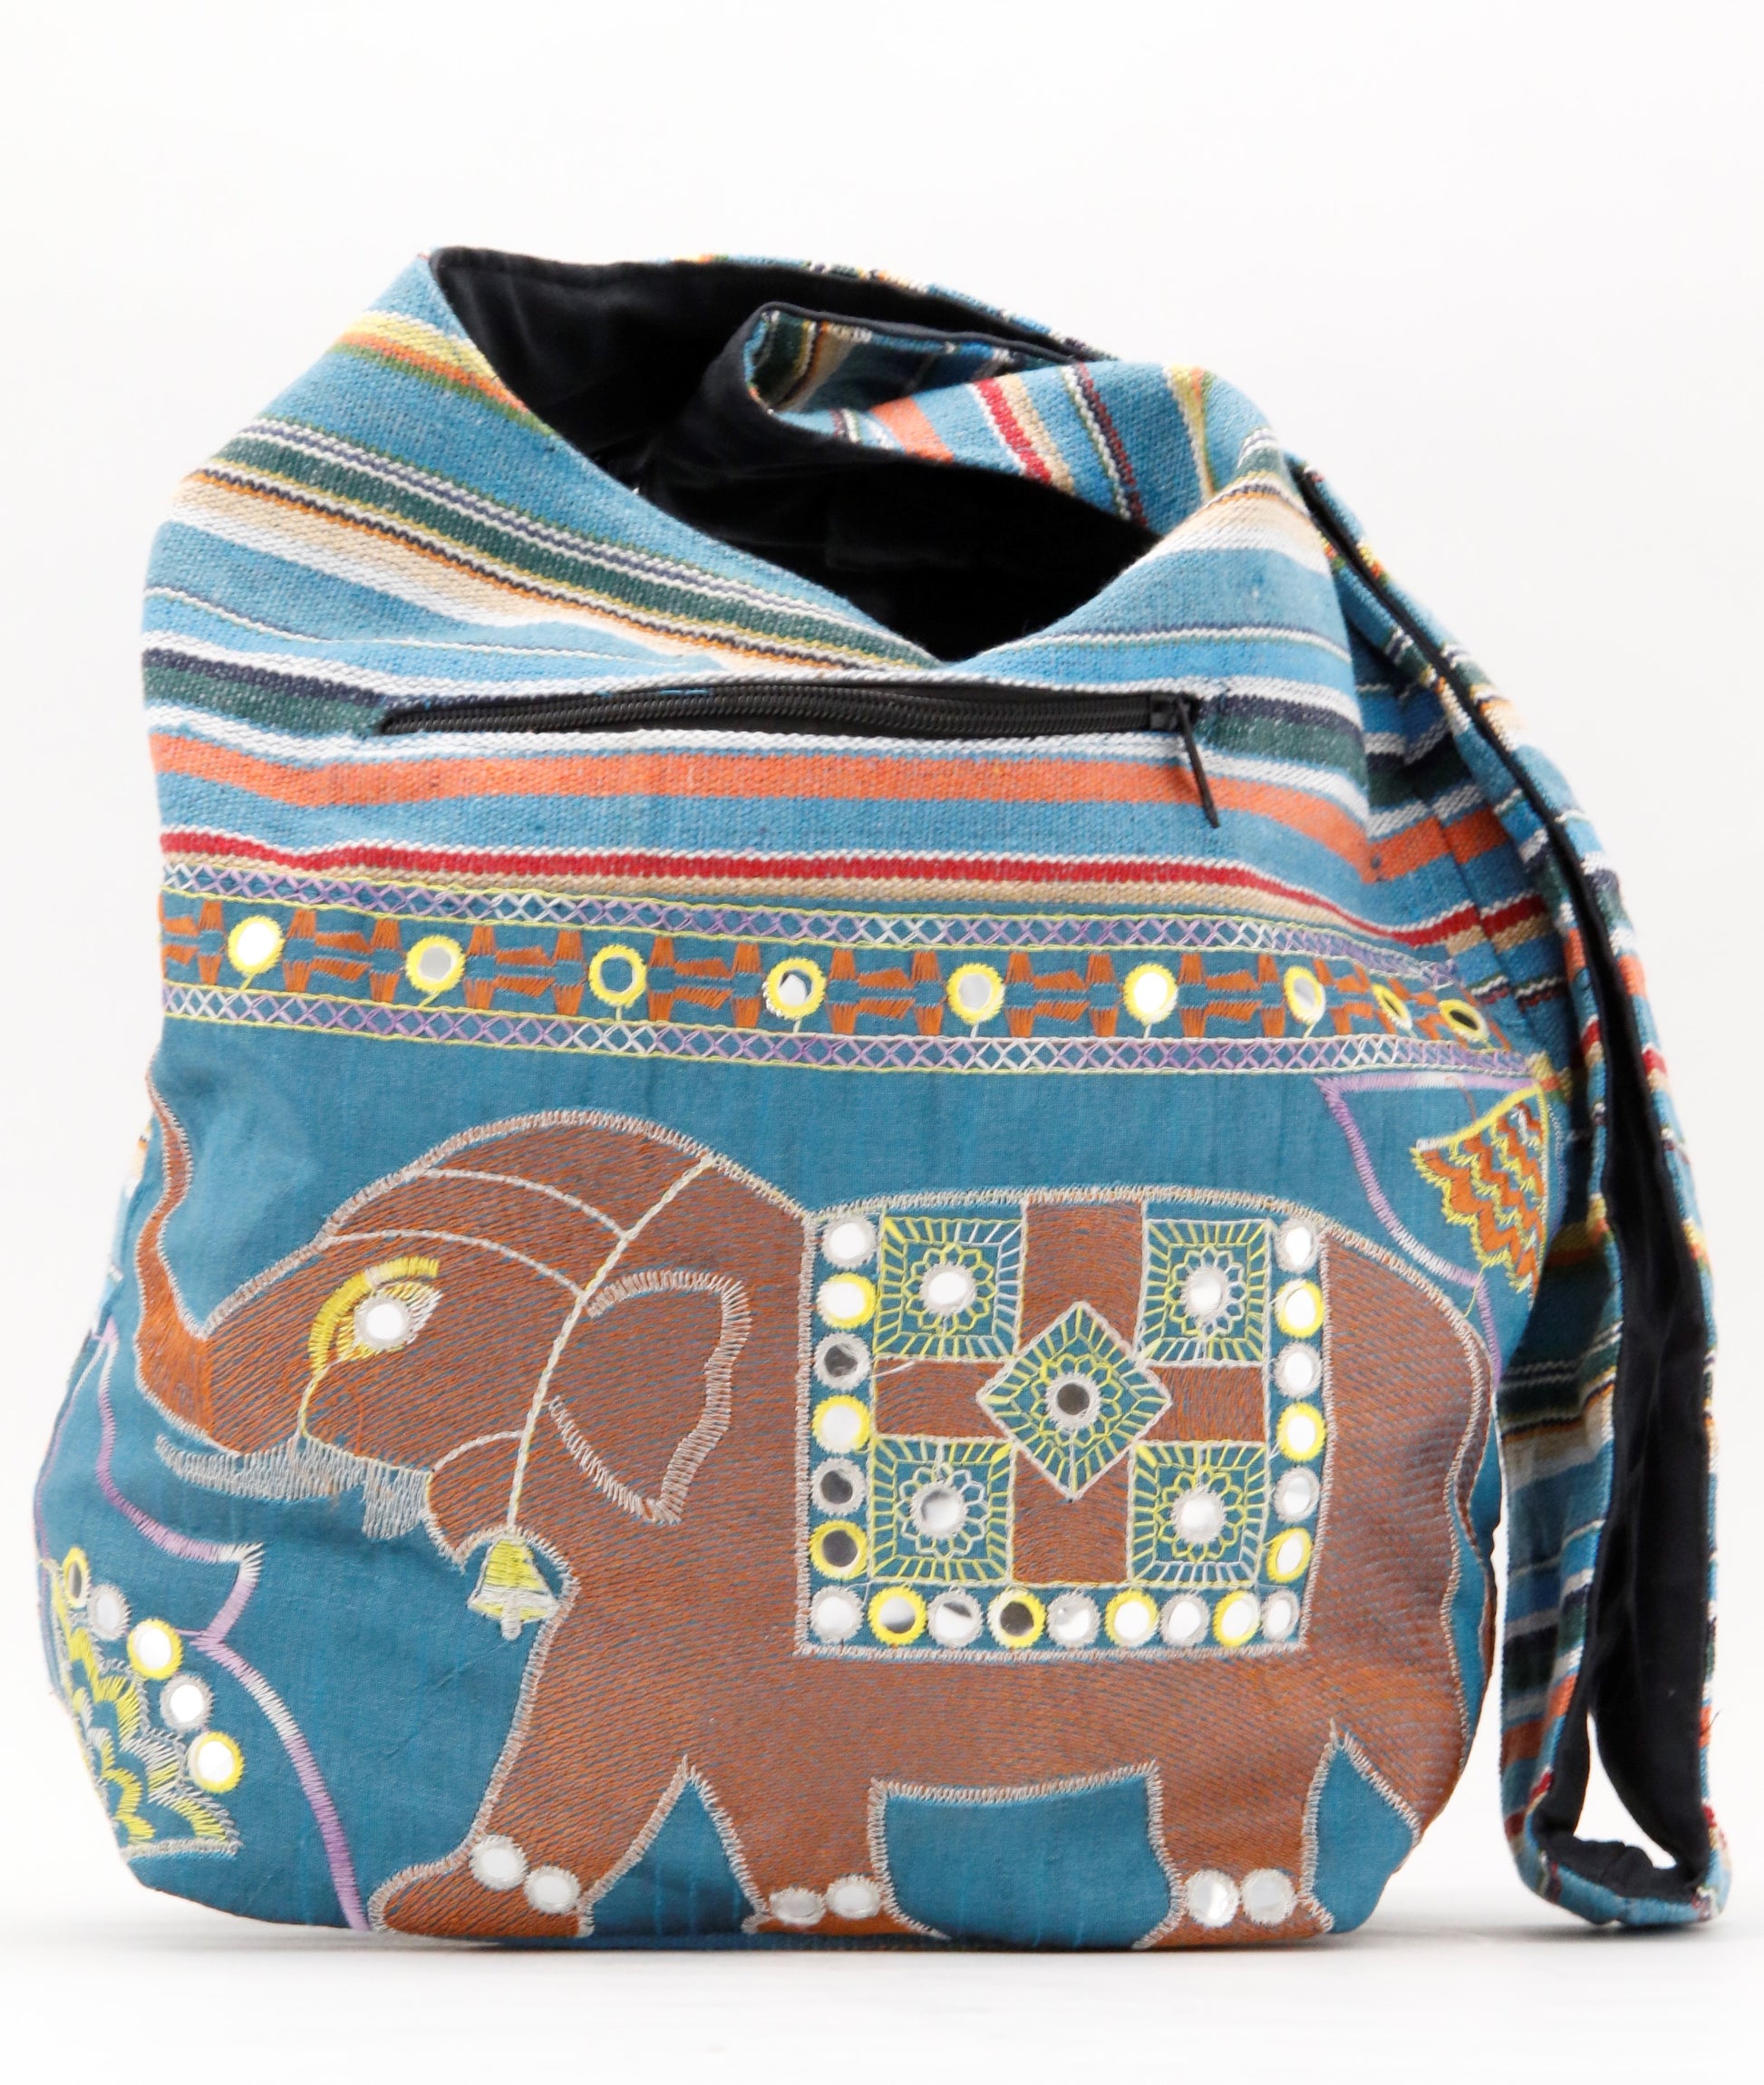 ELEPHANT BAG BROWN WITH BLUE BACKGROUND